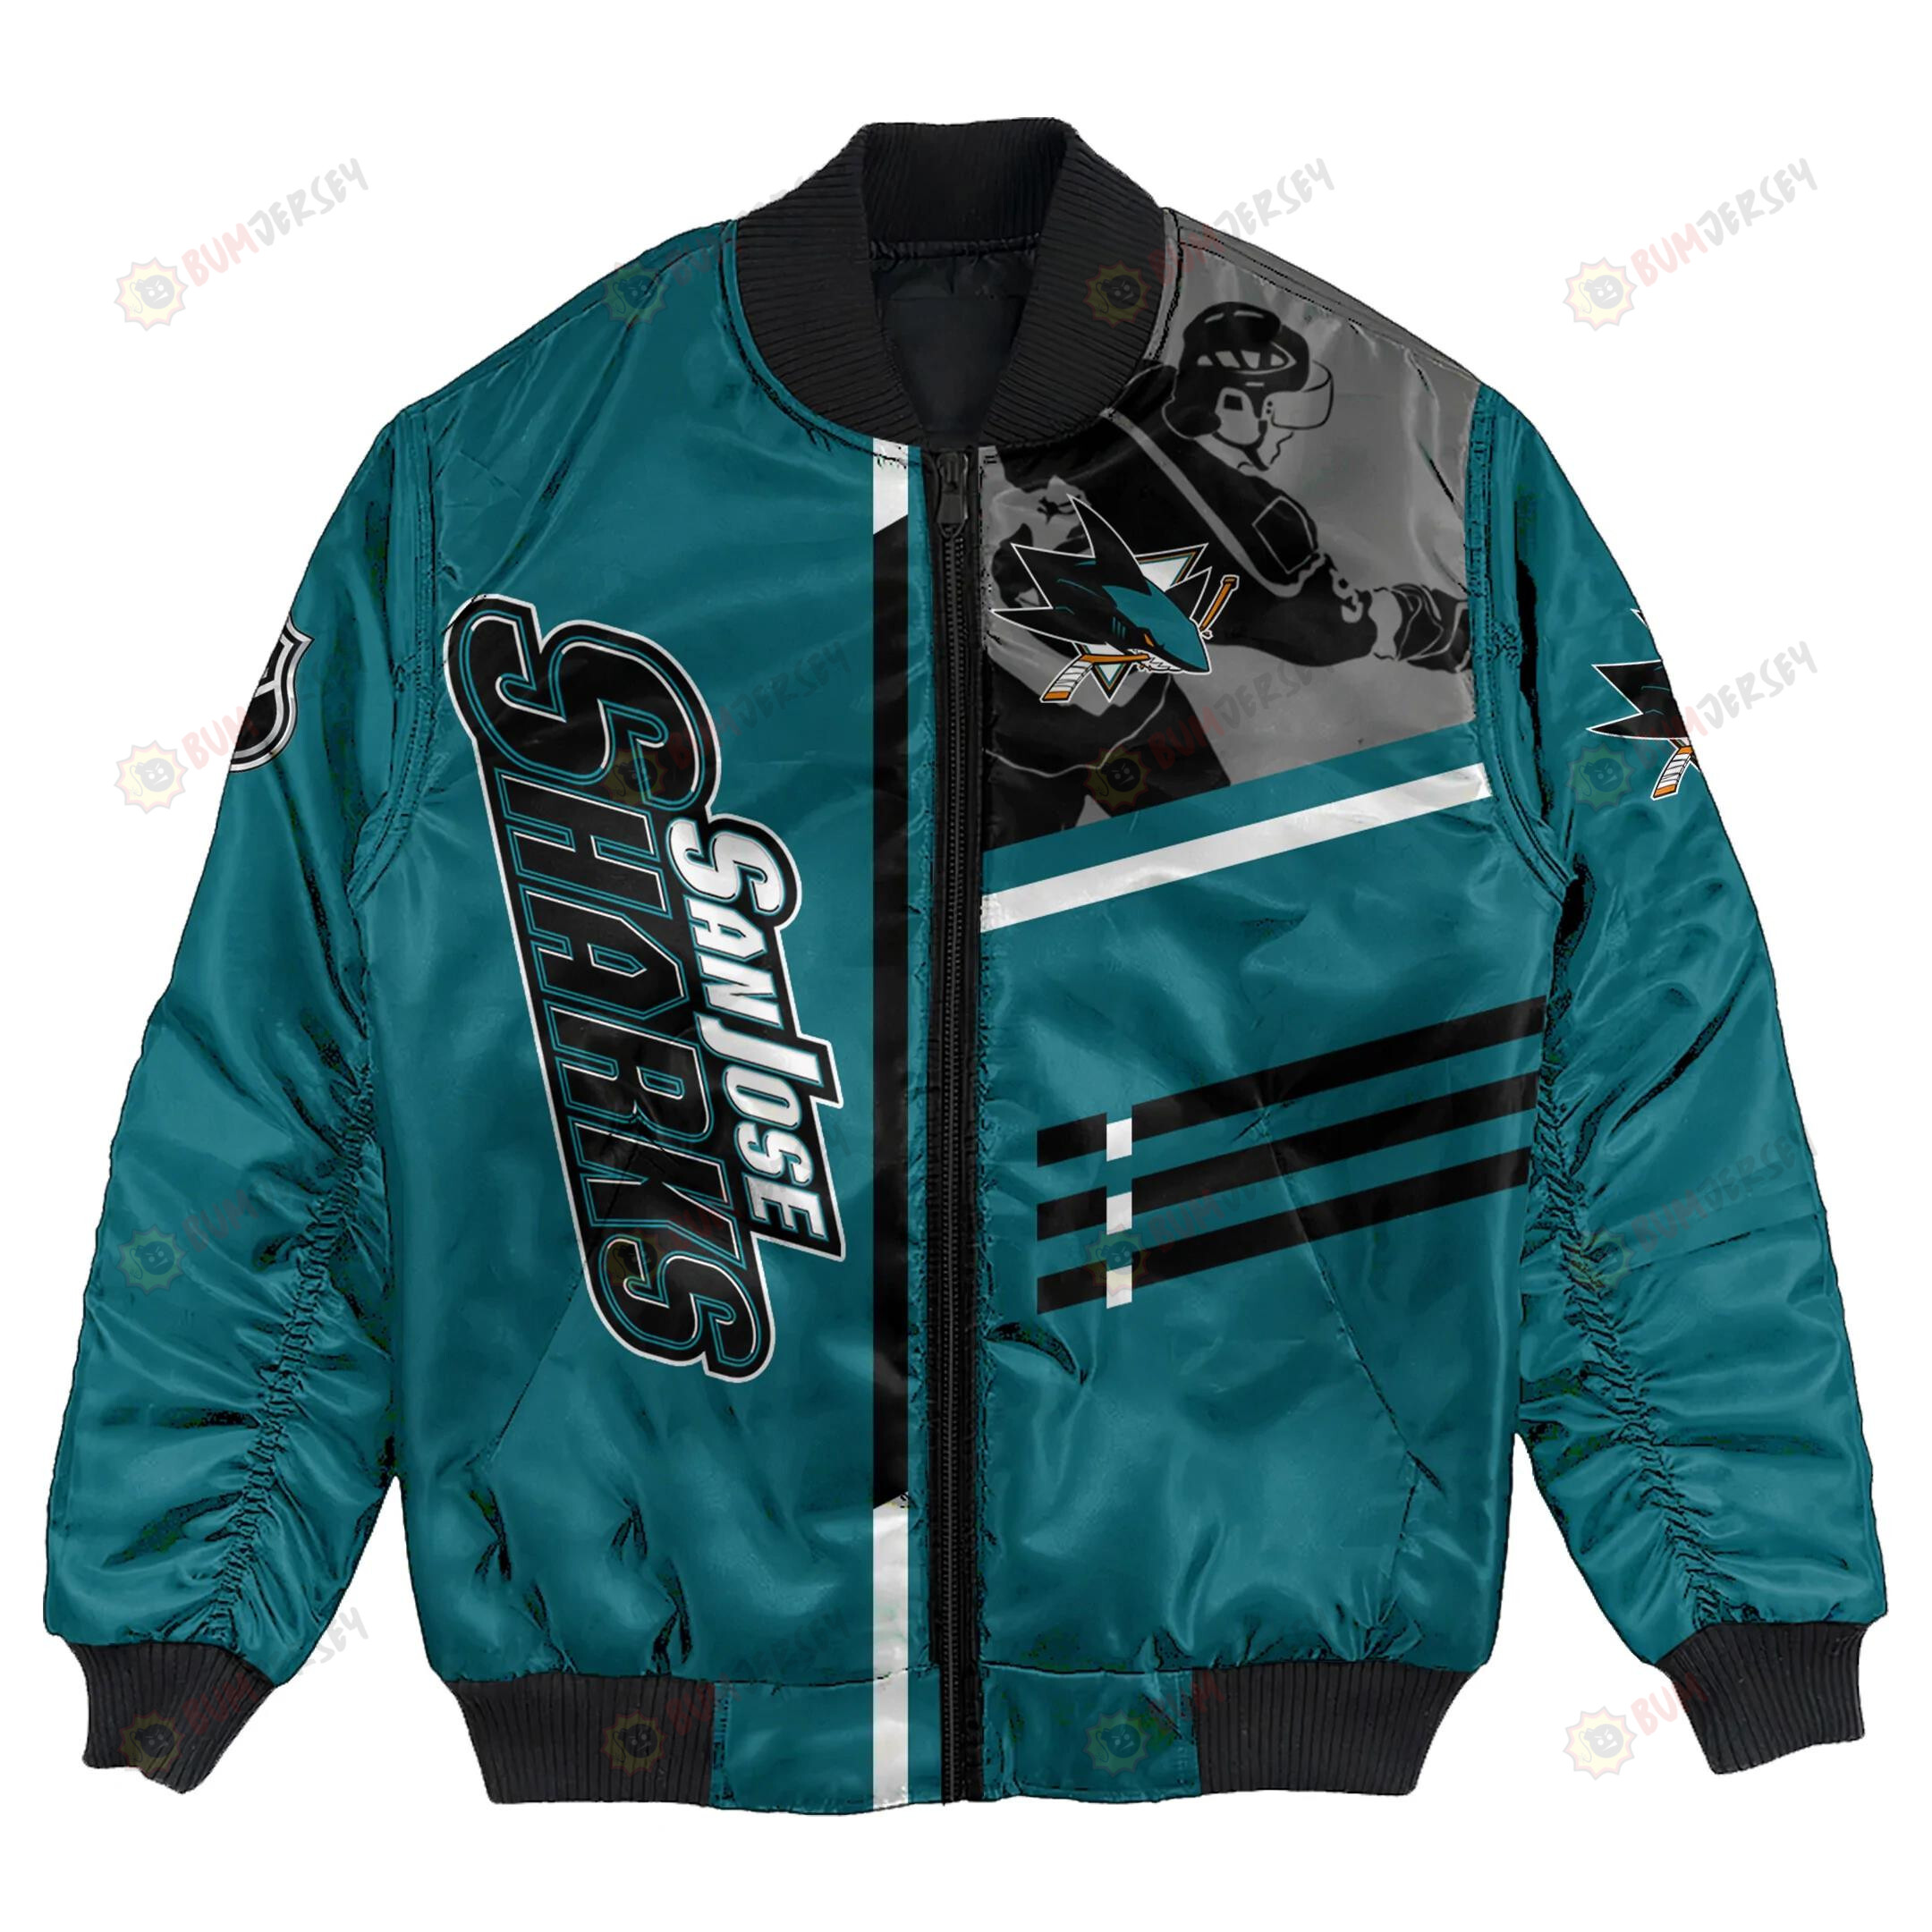 San Jose Sharks Bomber Jacket 3D Printed Personalized Hockey For Fan